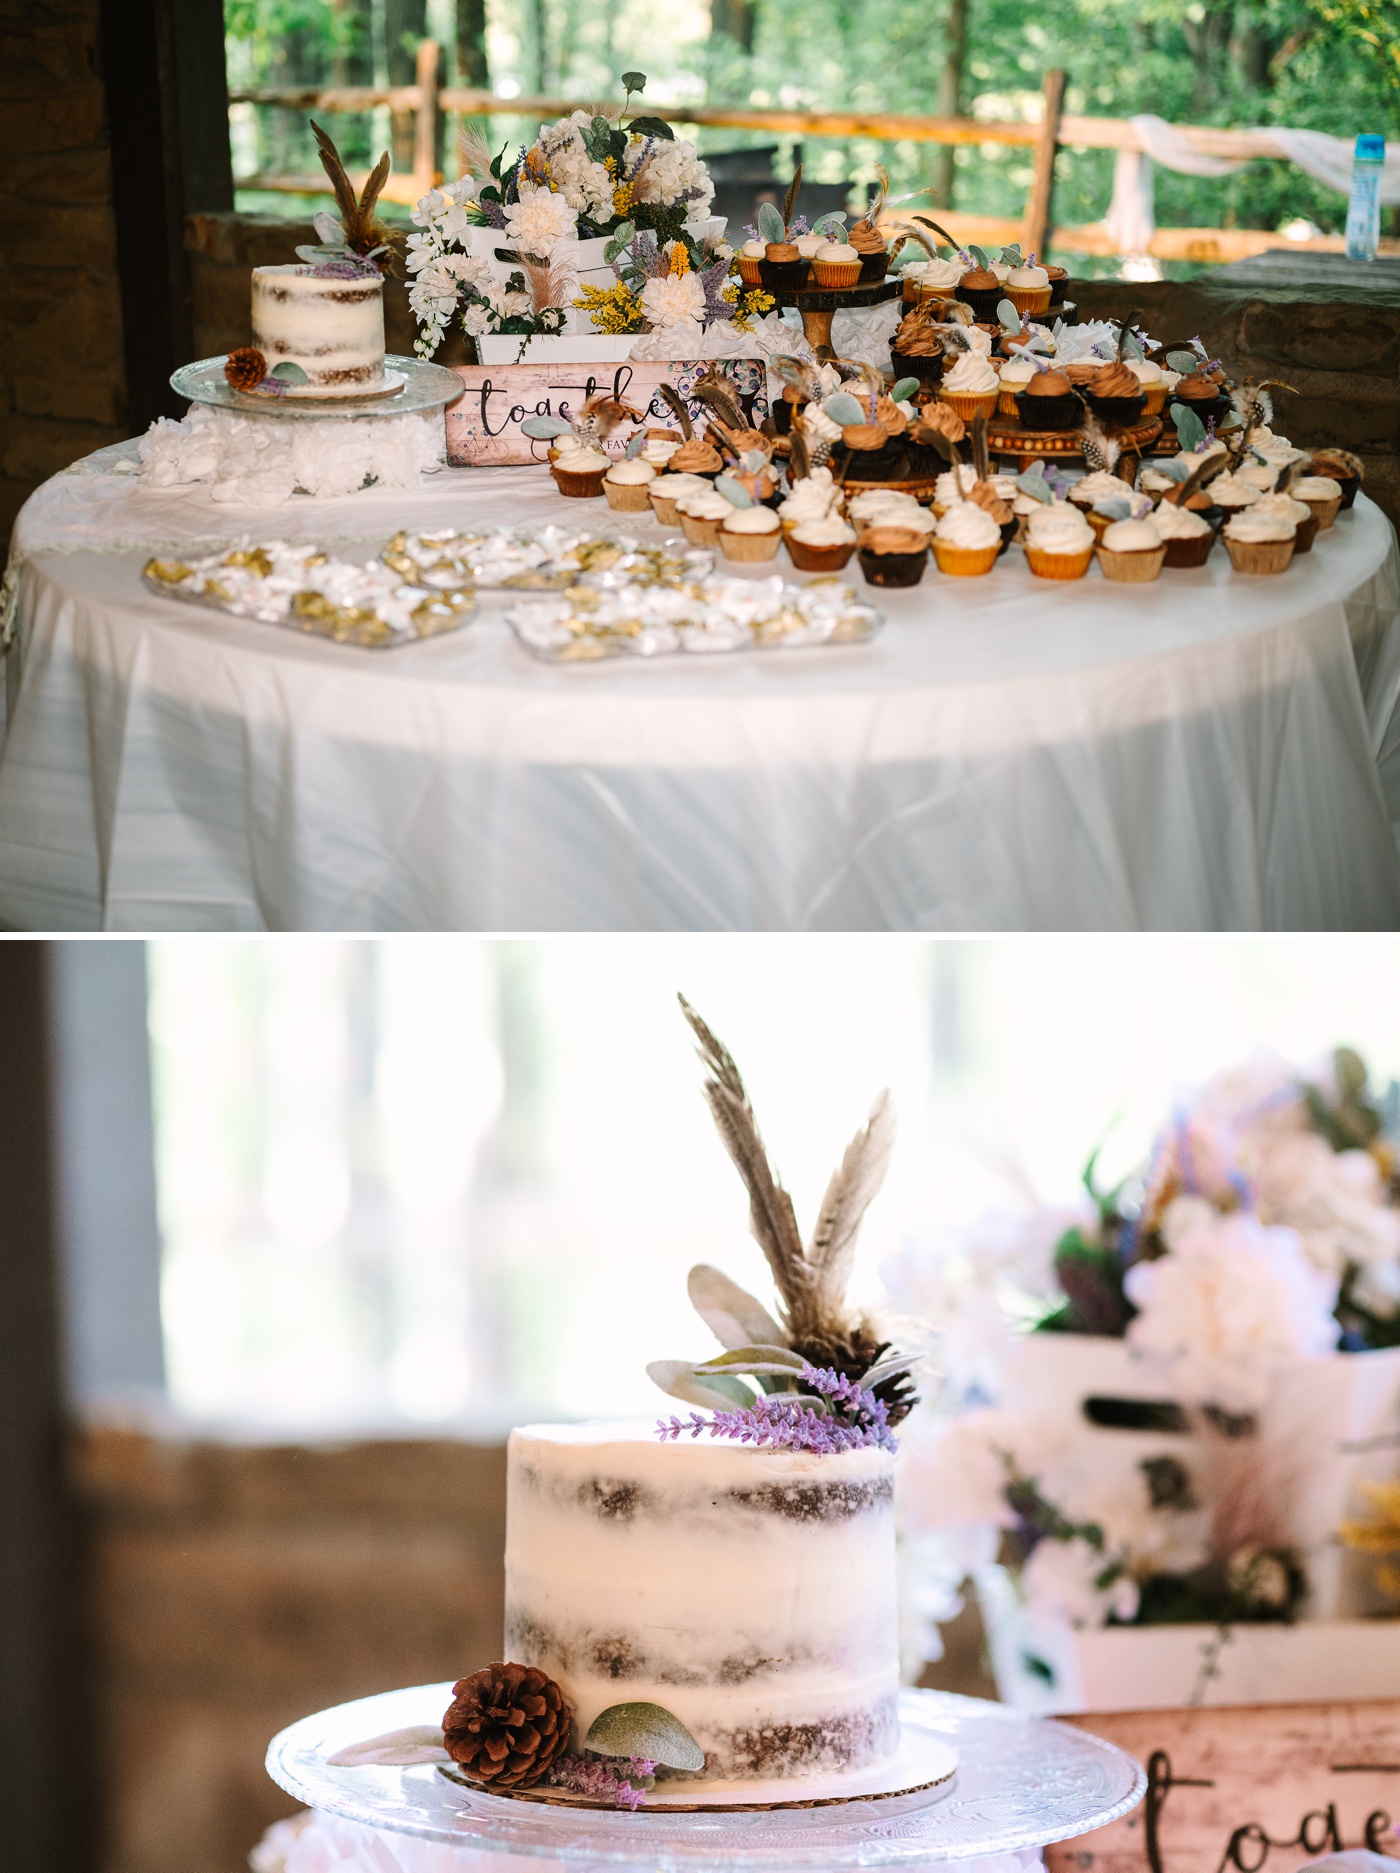 Nature-inspired naked wedding cake decorated with pinecones, lavender, and feathers